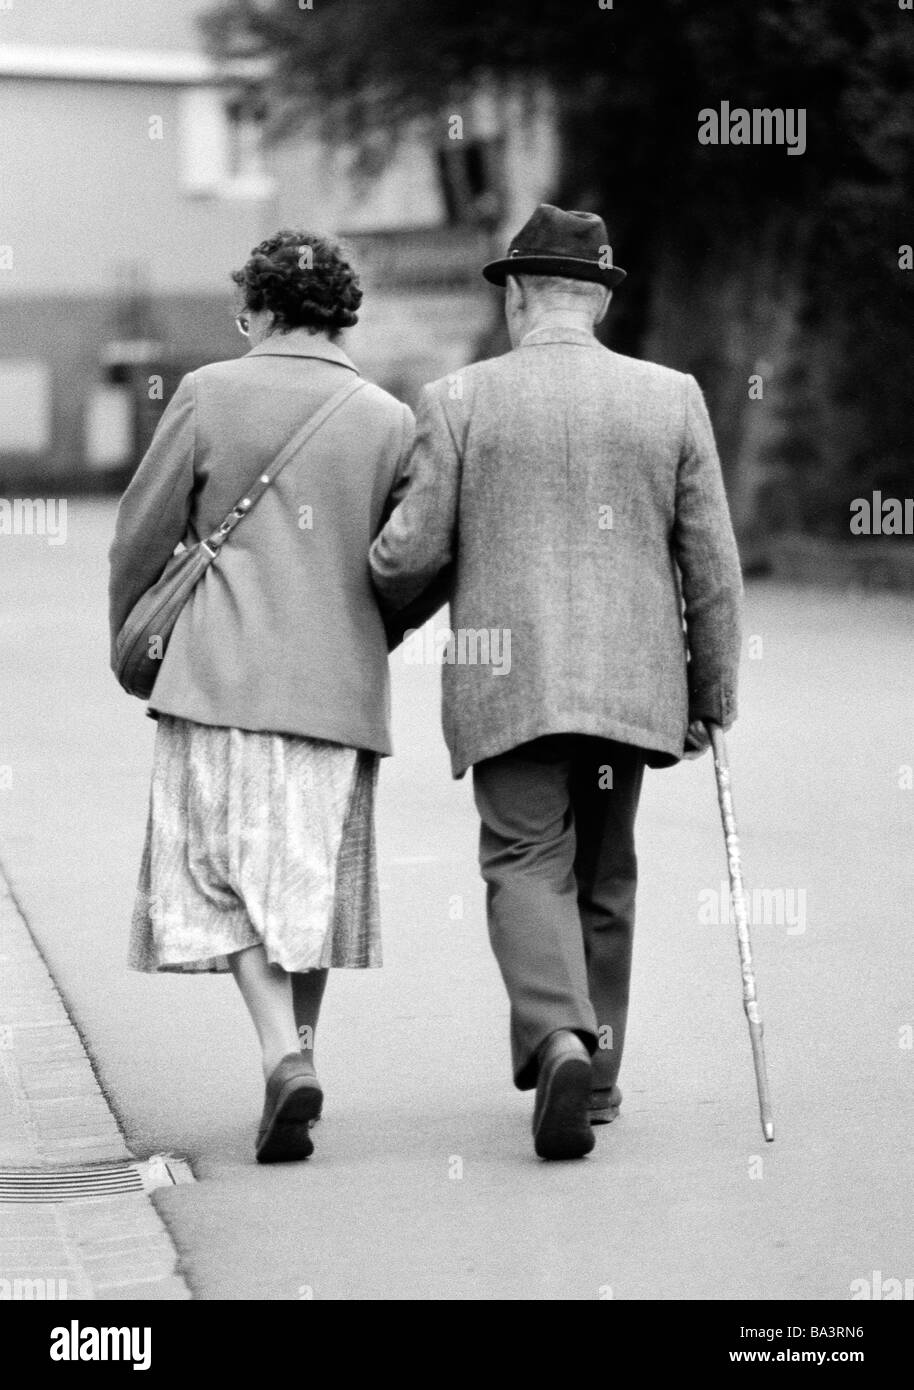 Eighties, black and white photo, people, elder people, older couple walking arm in arm, jacket, trousers, skirt, hat, aged 65 to 75 years Stock Photo